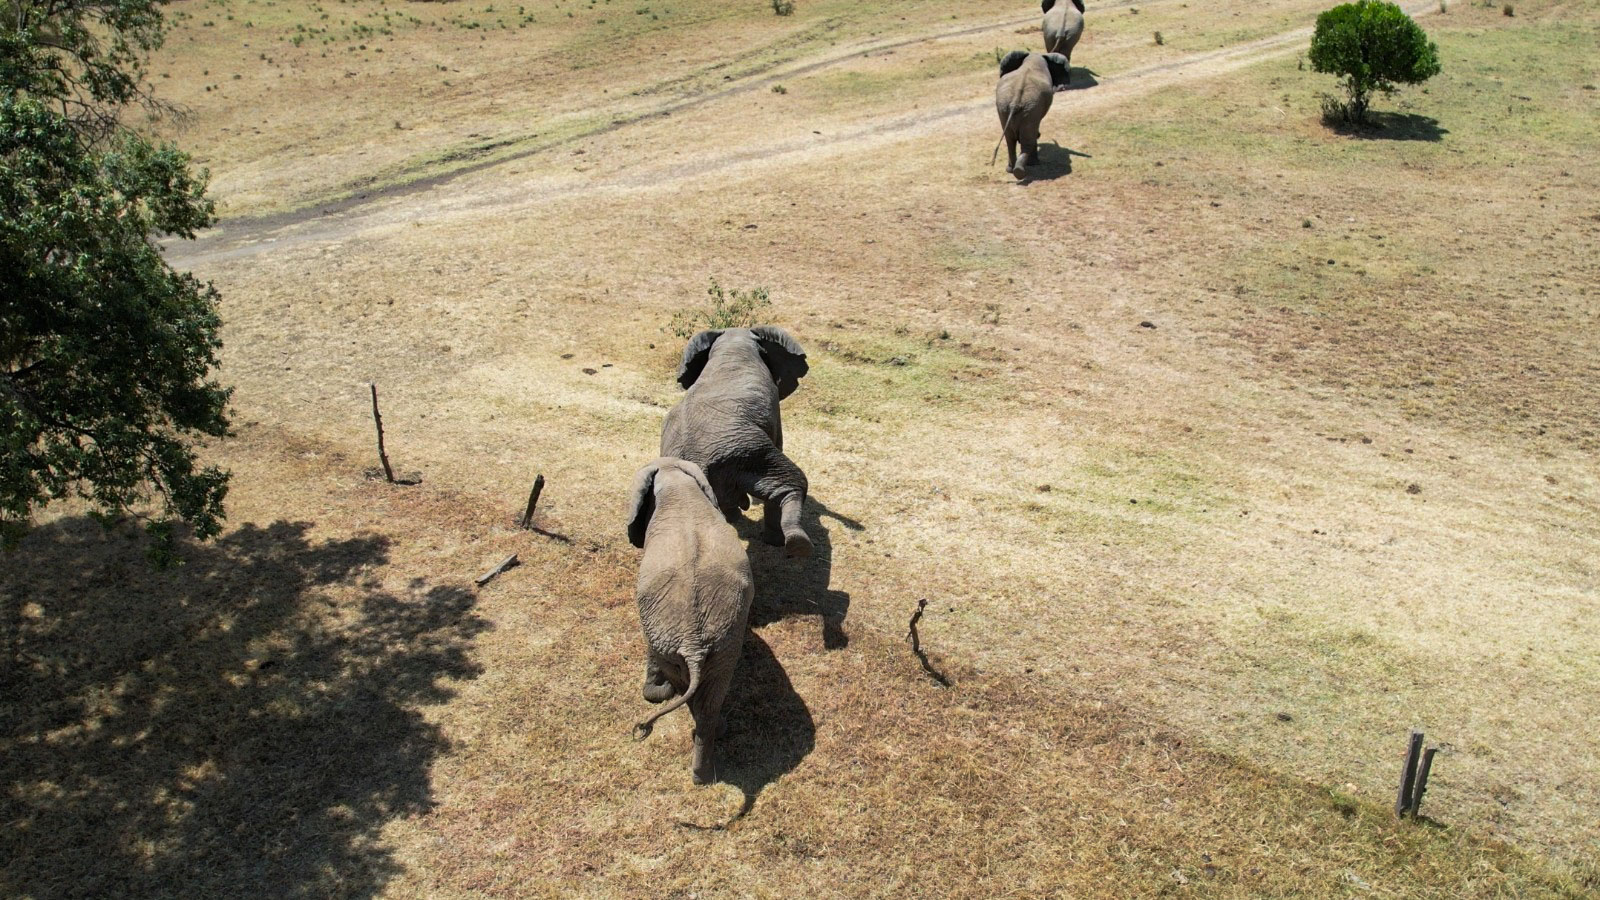 Above: A herd of elephants is gently guided out of a community farm